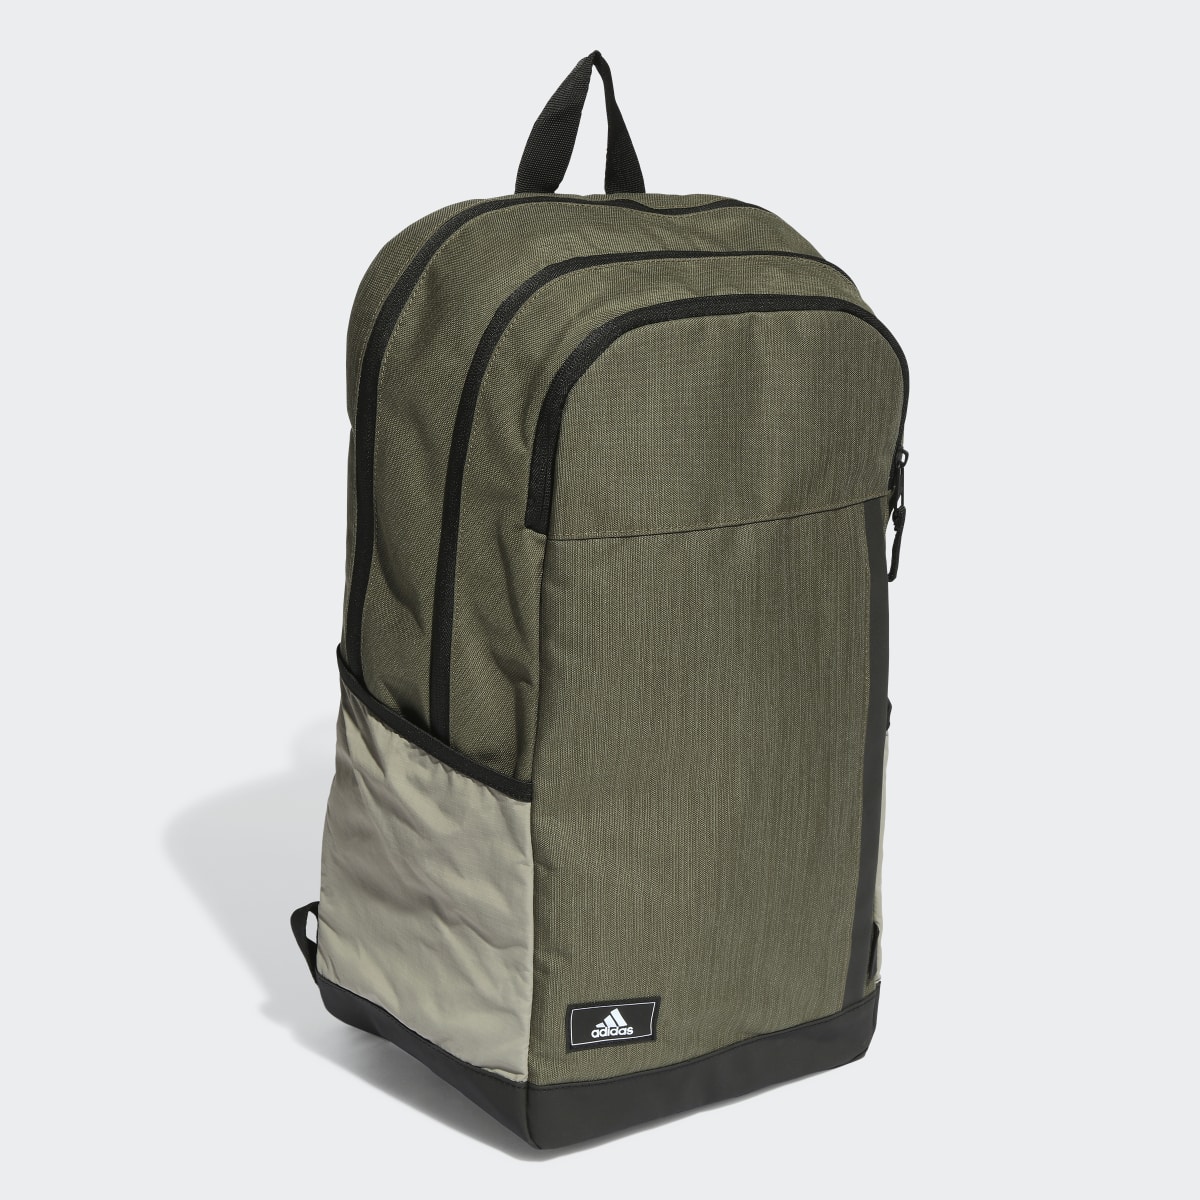 Adidas Motion Material Backpack. 4